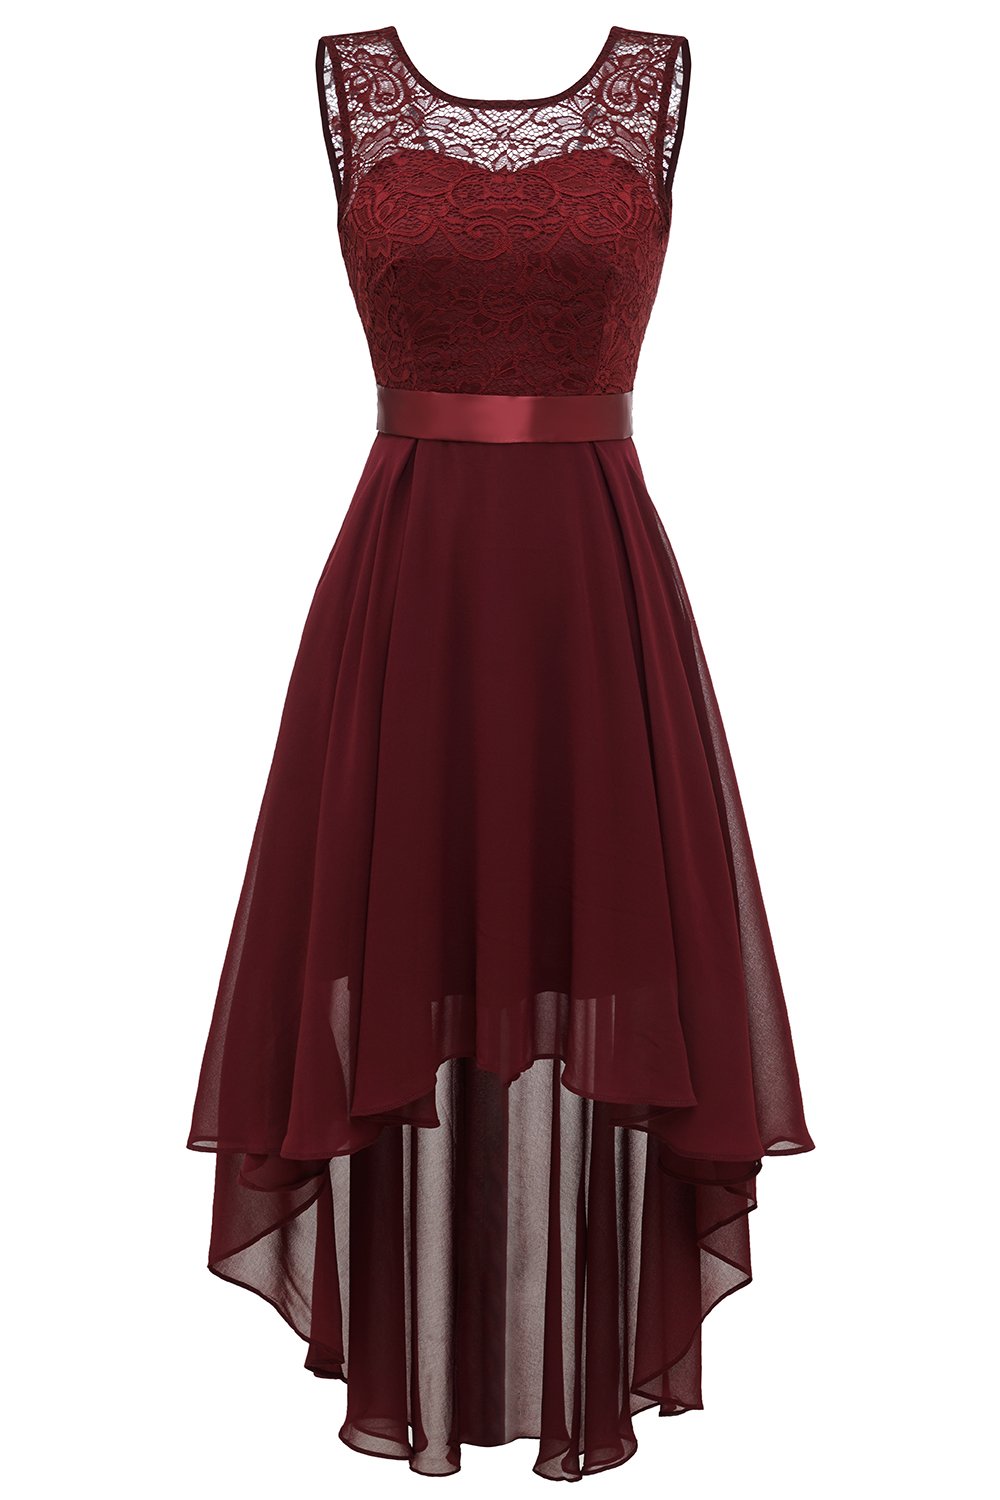 High Low Round Neck Burgundy Lace Dress with Bowknot